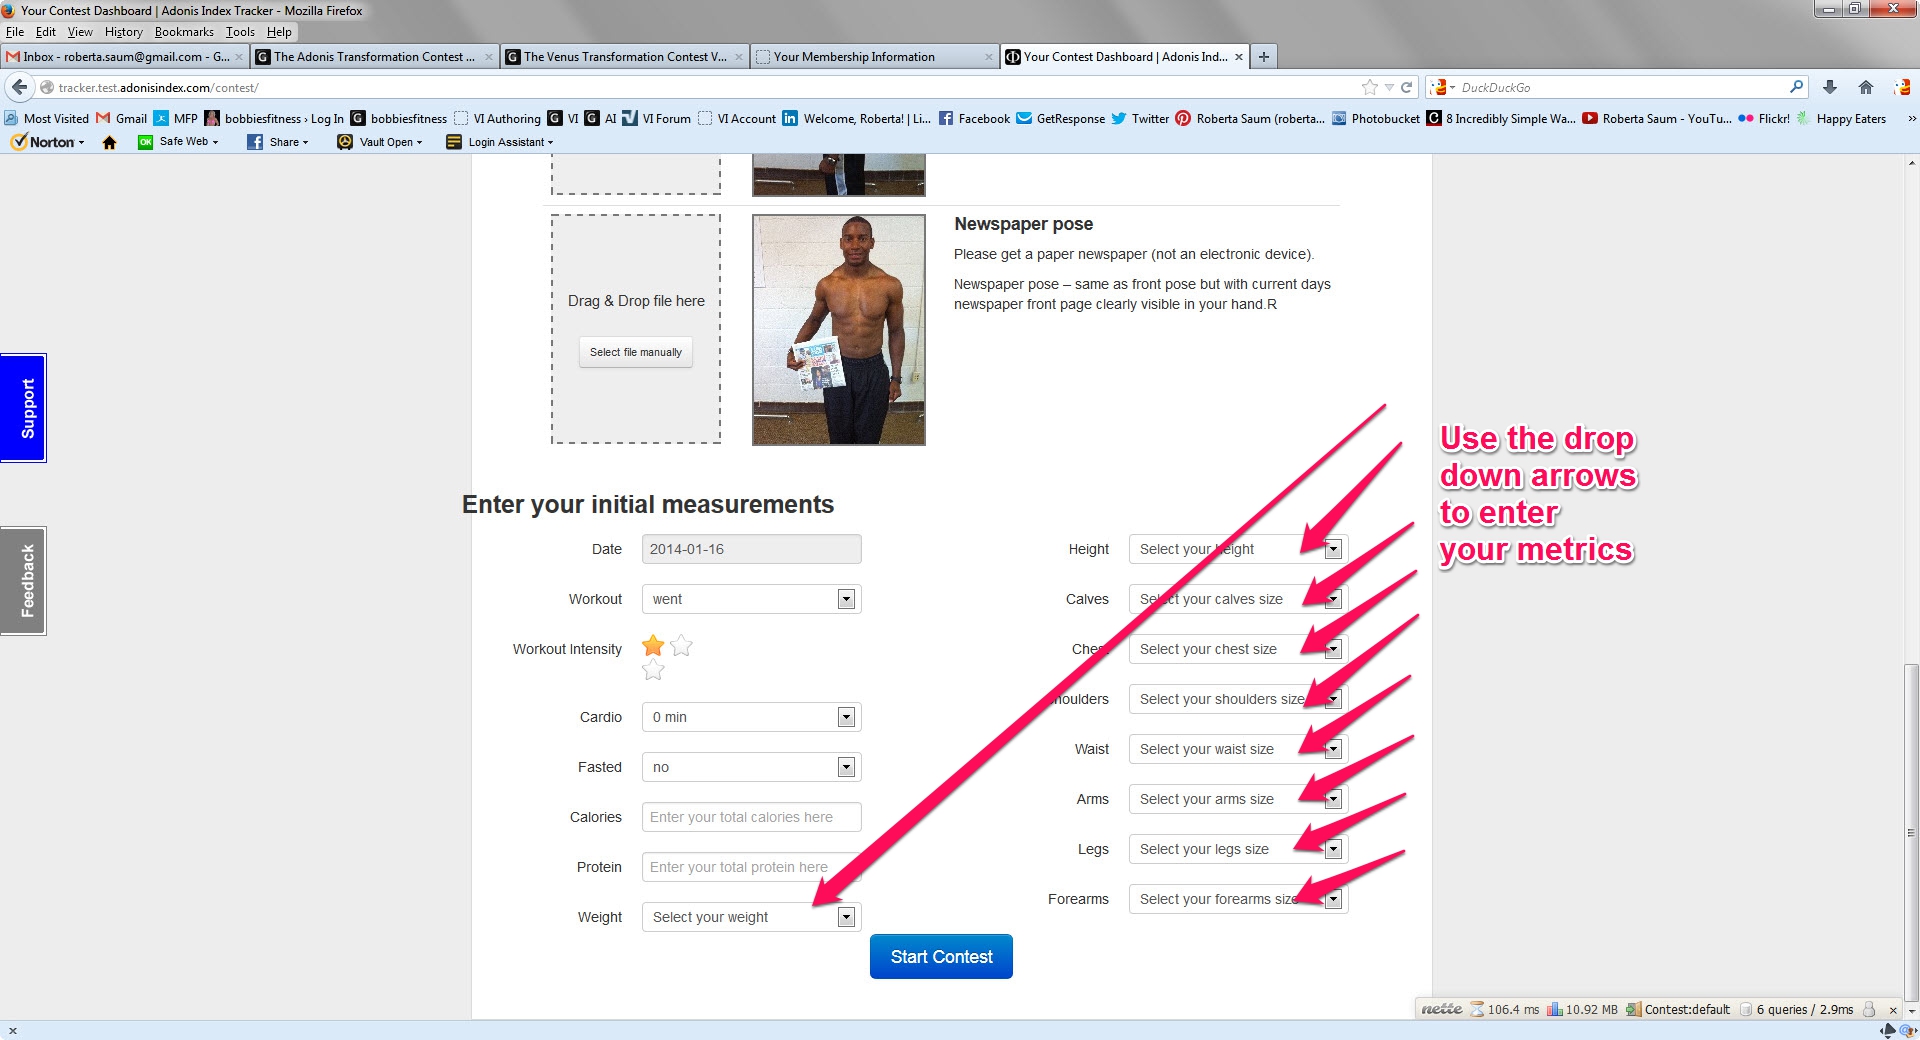 Step 4 Scroll down and use drop down arrows to enter metrics